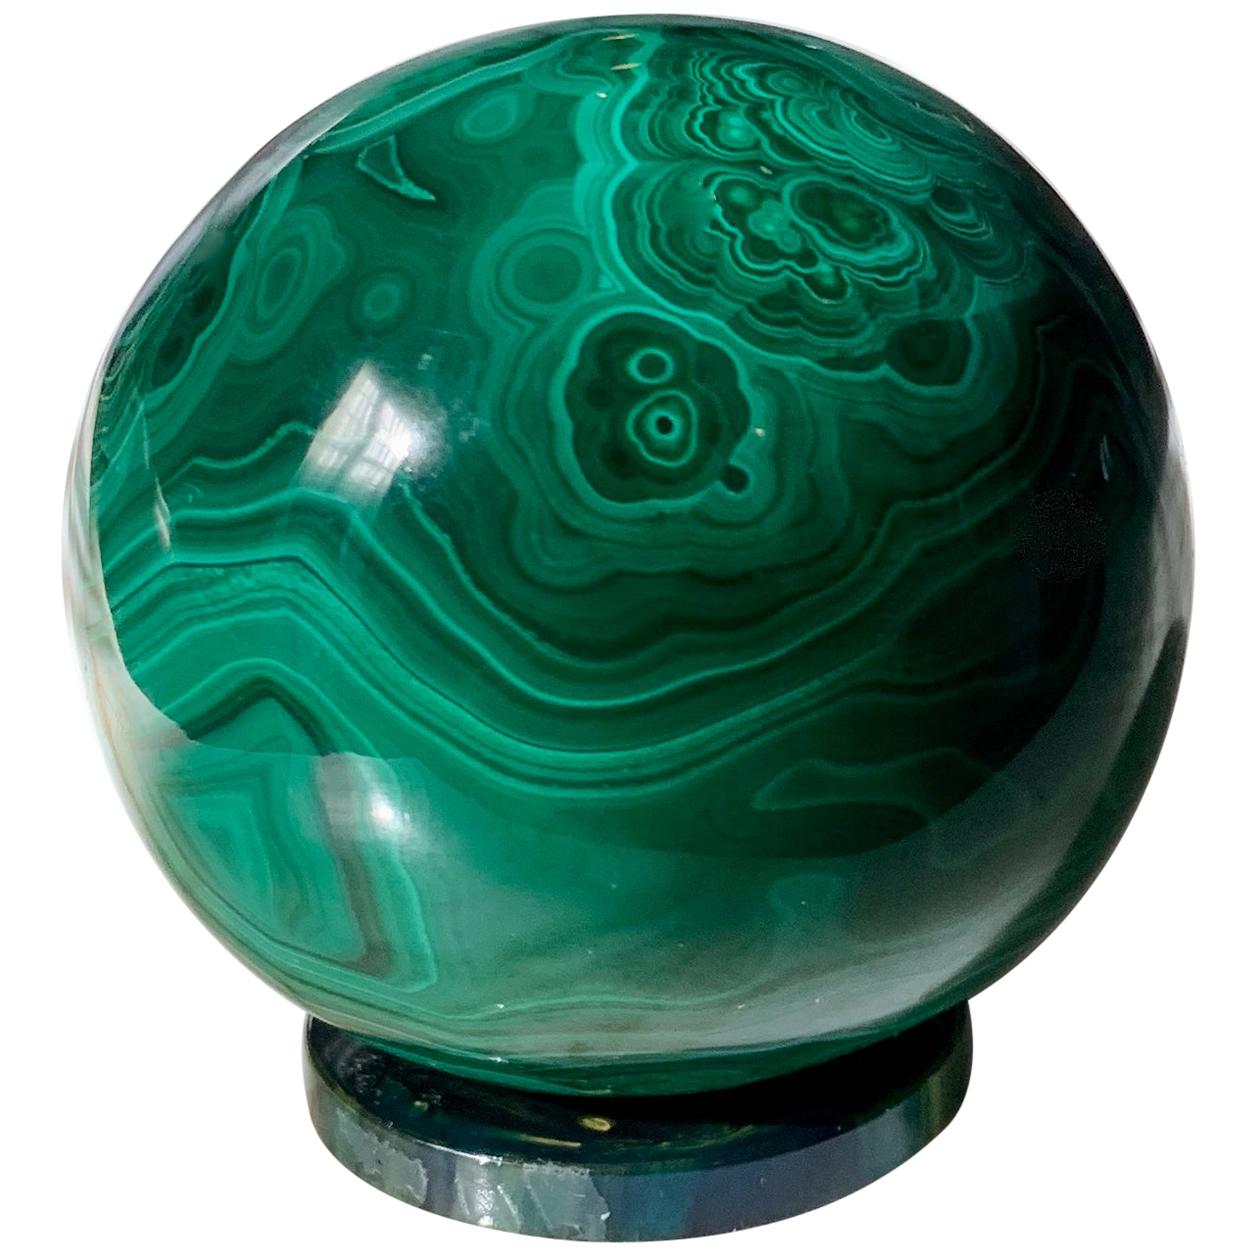 Solid Malachite Sphere Paperweight on Malachite Disk